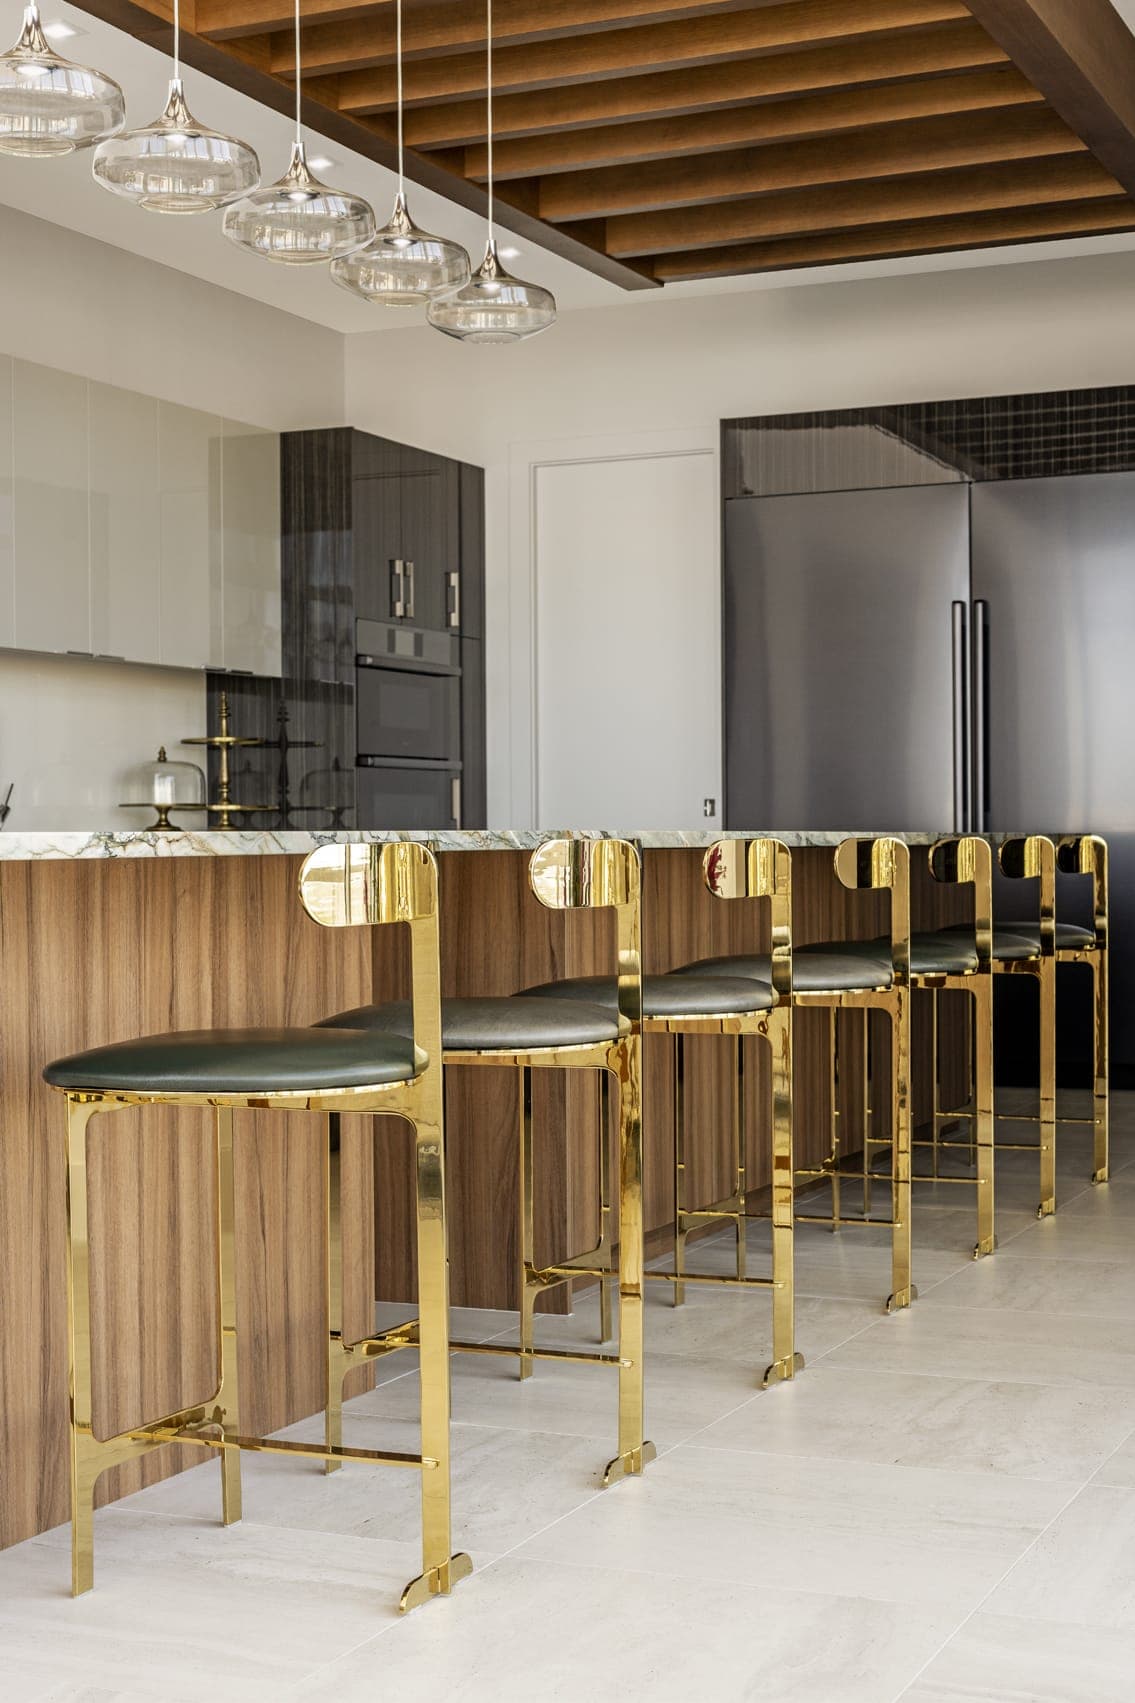 Jkl Penthouse The Blvd Contemporary White Kitchen Wood Canopy Brass And Black Leather High Chairs